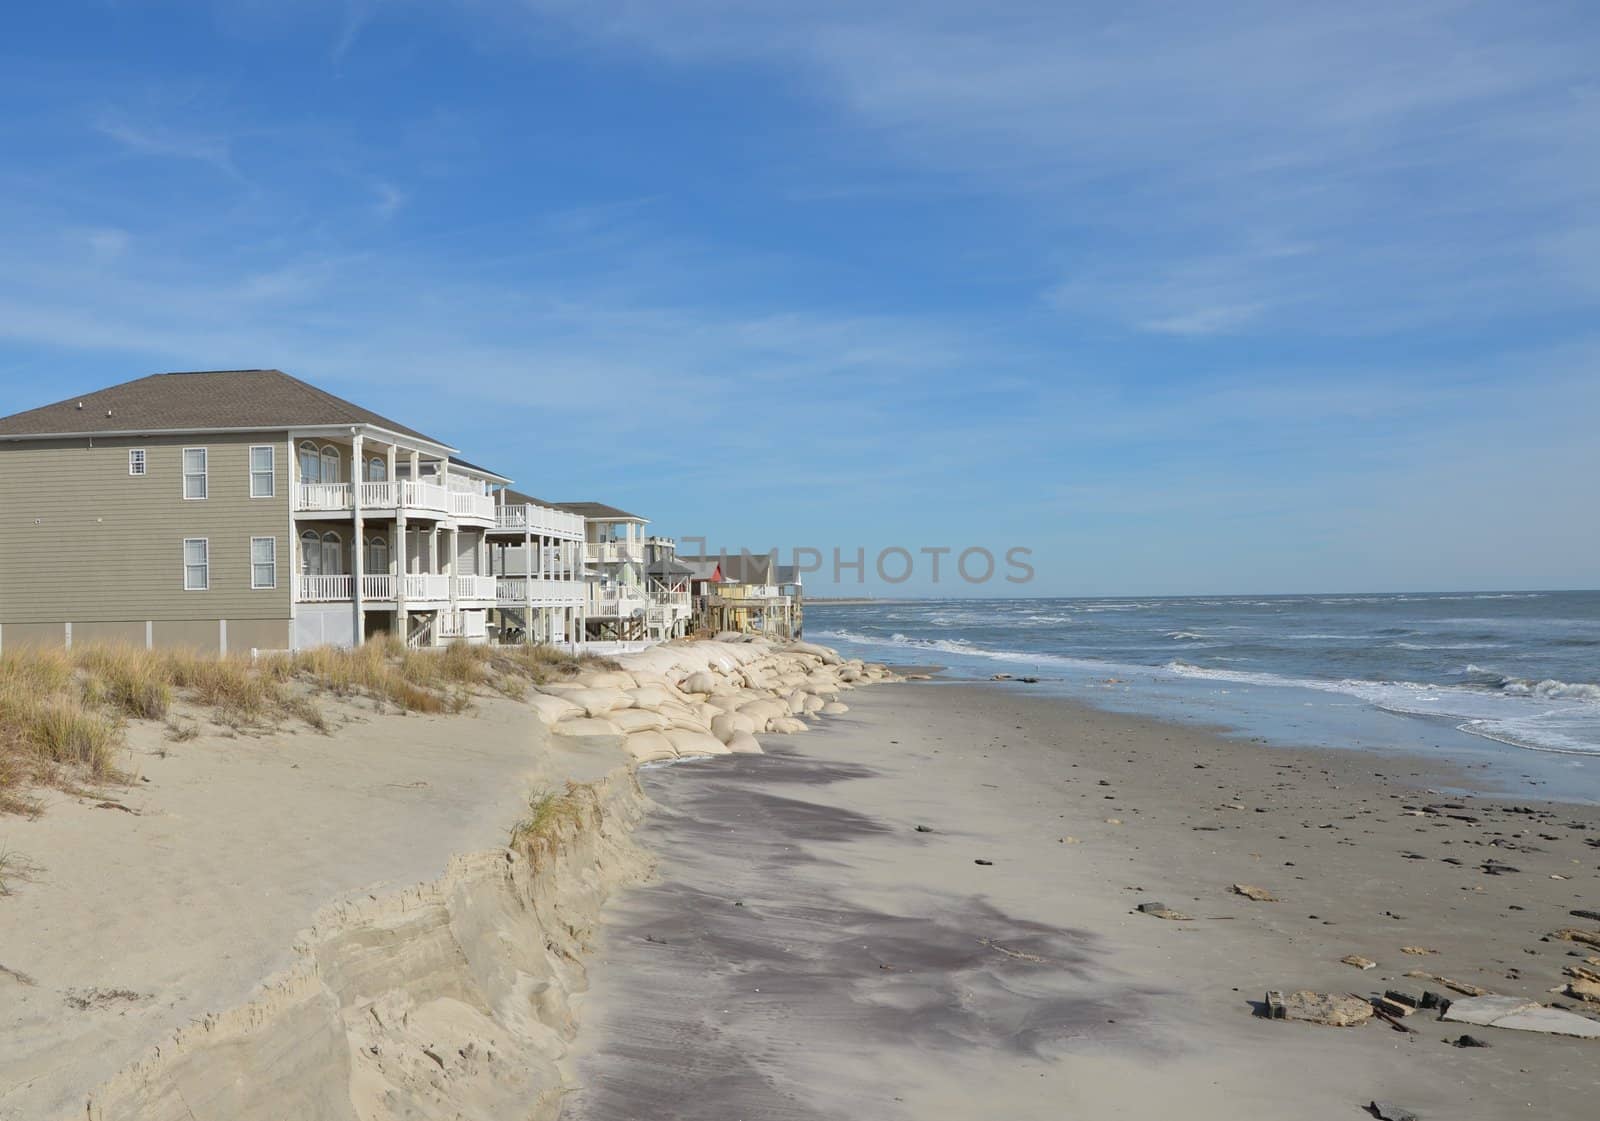 Shore homes by northwoodsphoto